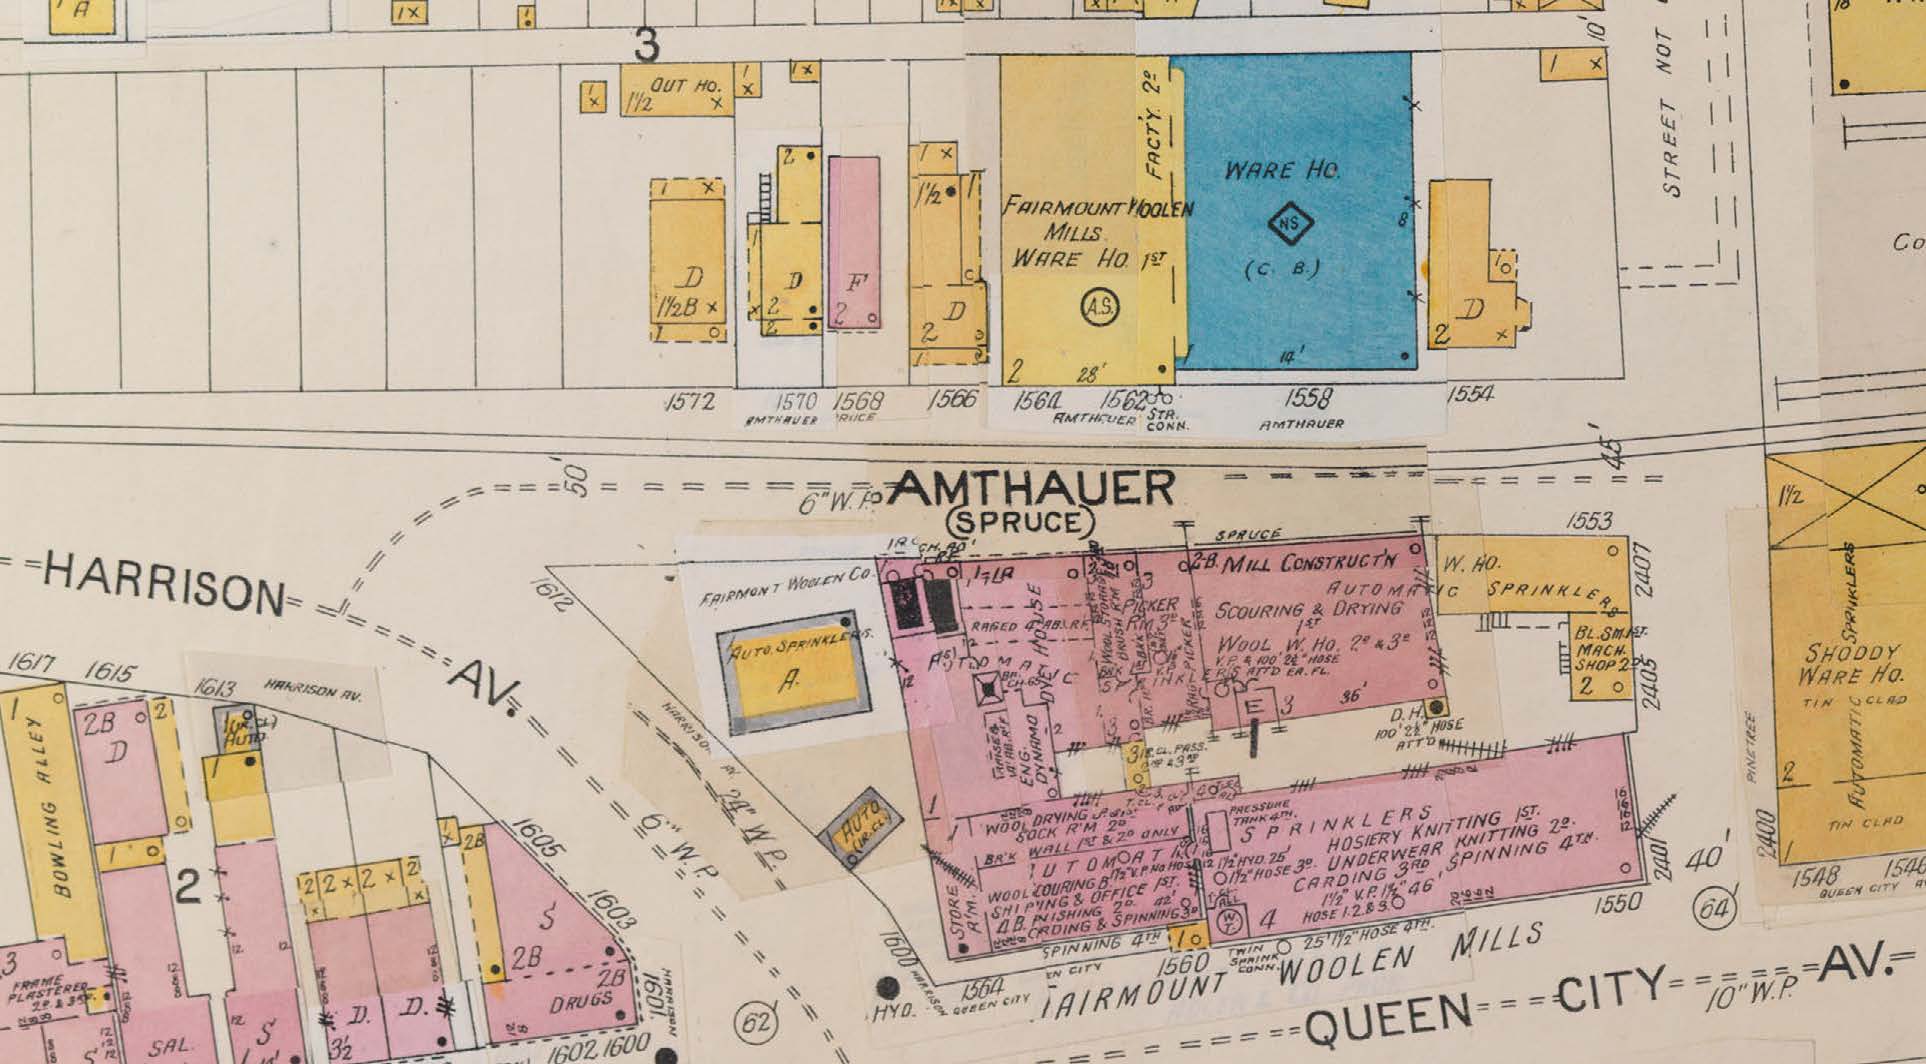 1904 Sanborn map of the Adler Co at the NE corner of Harrison and Queen City Avenue